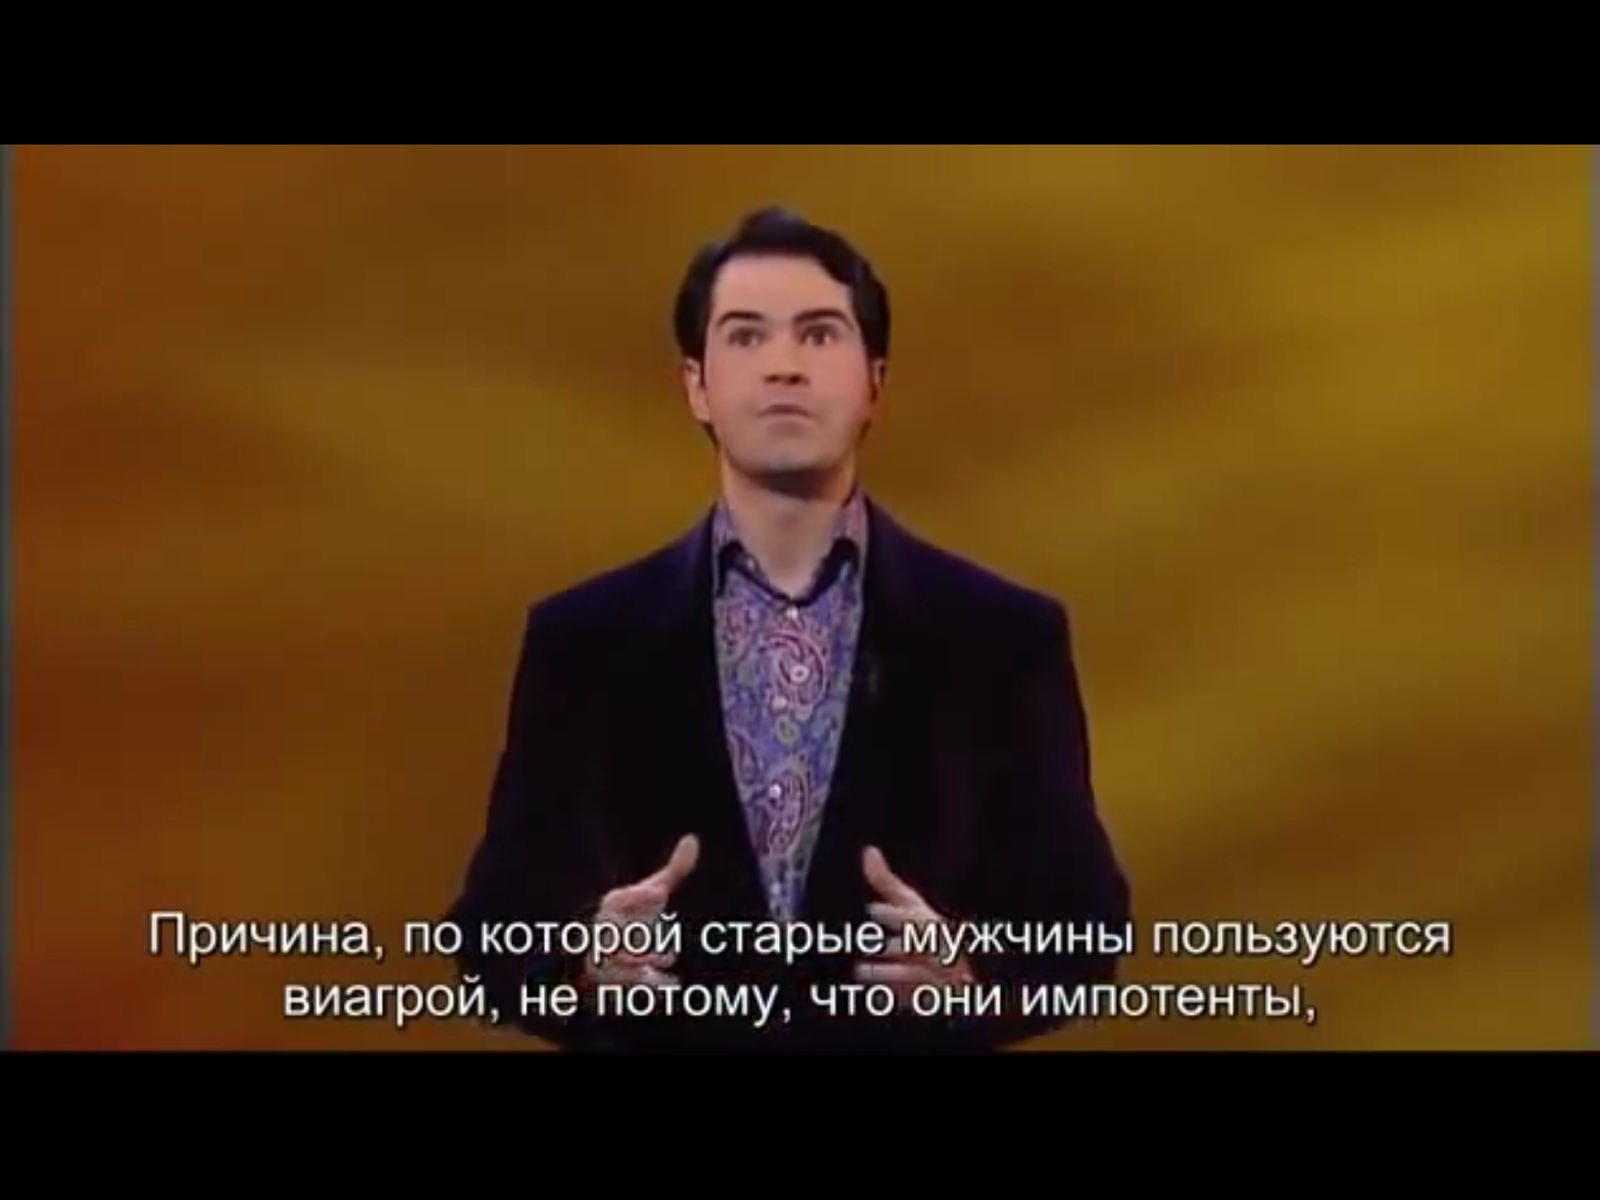 Jimmy Carr on Viagra - Comedian, Stand-up, Jimmy Carr, Show, Images, Picture with text